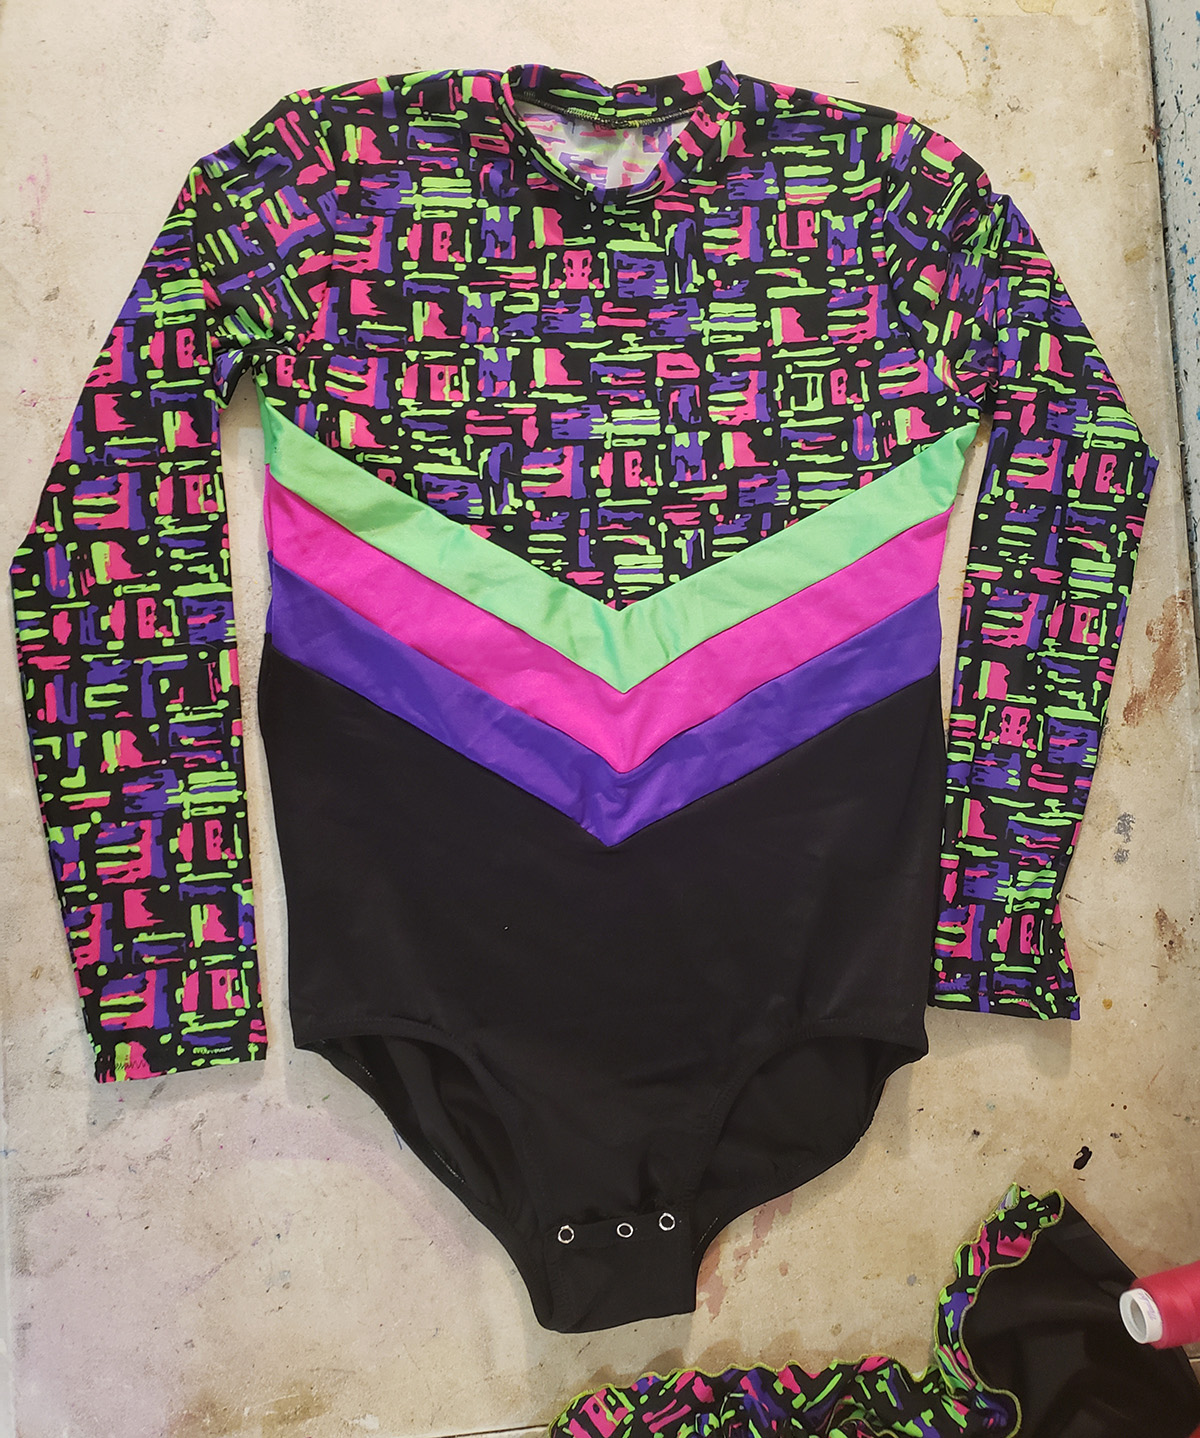 A mens skating bodyshit made from obnoxious neon colours.